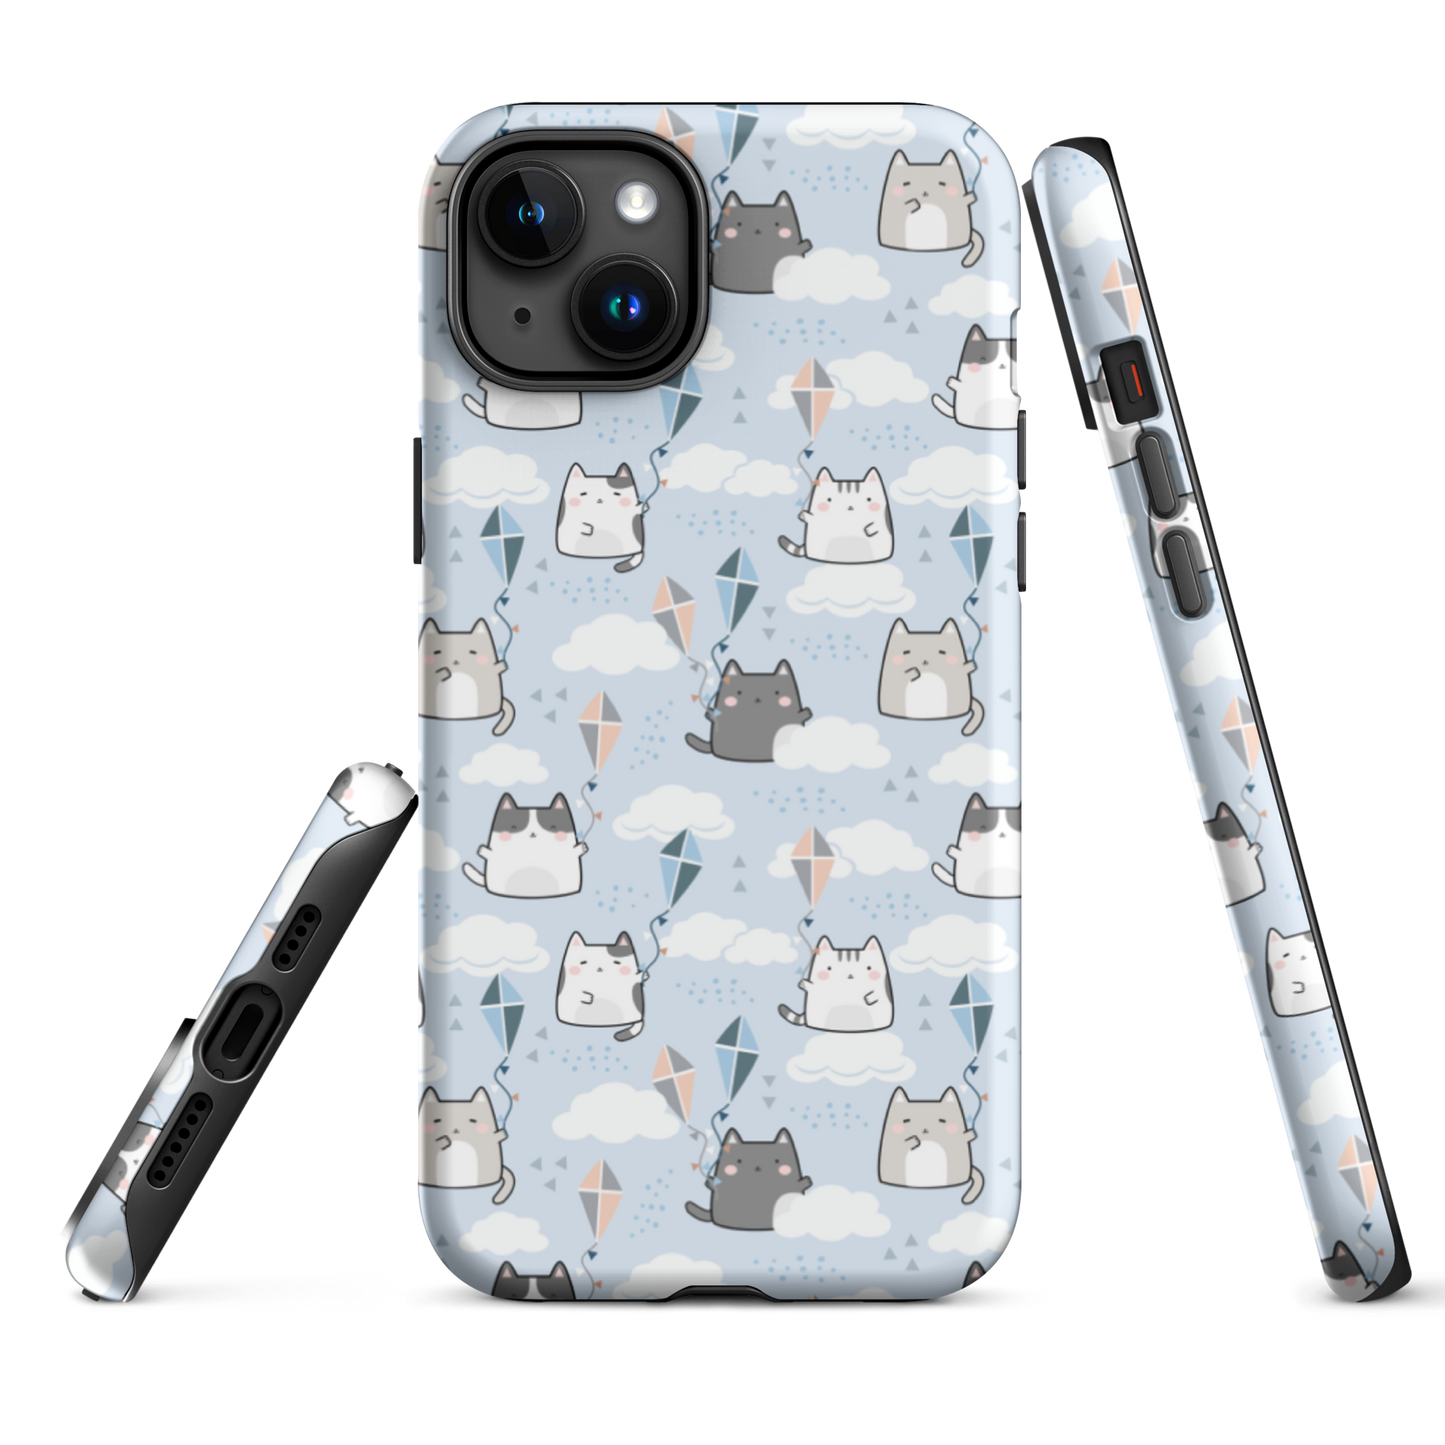 Tough case for iPhone 11, 12, 13, 14, 15 Variations | Cat Cloud Kite LightBlue Background